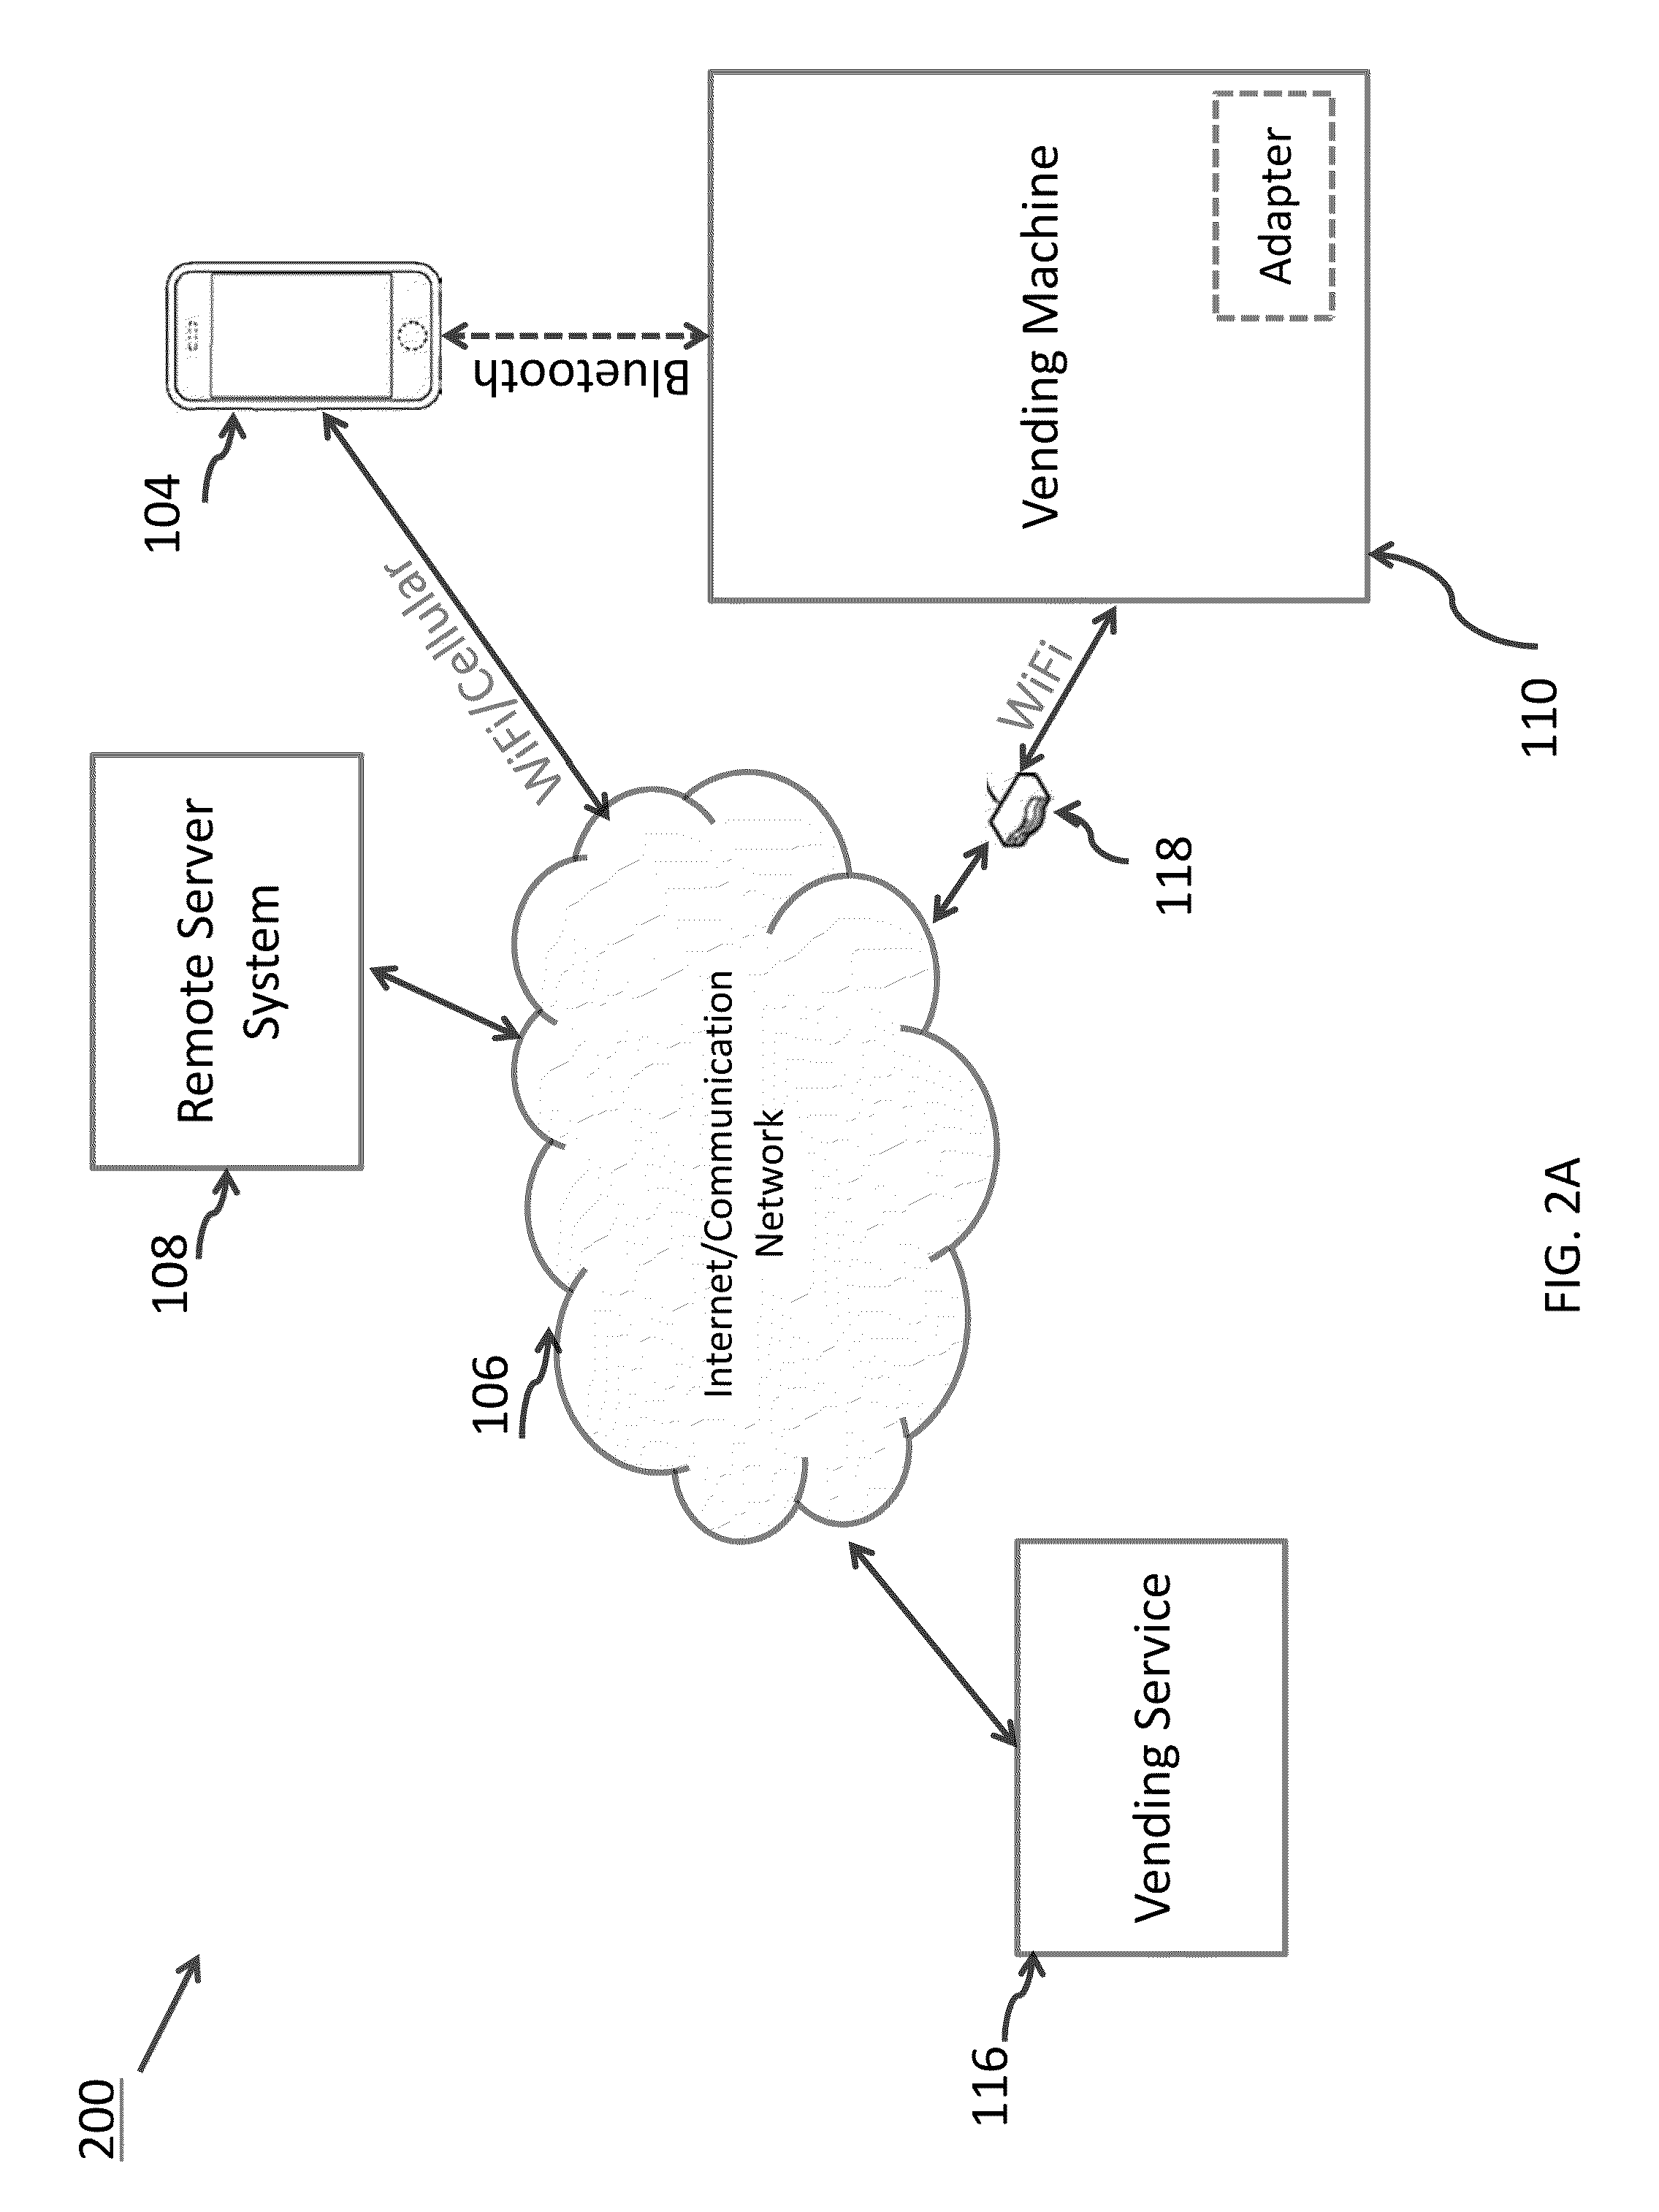 System and method for adapted vending solutions